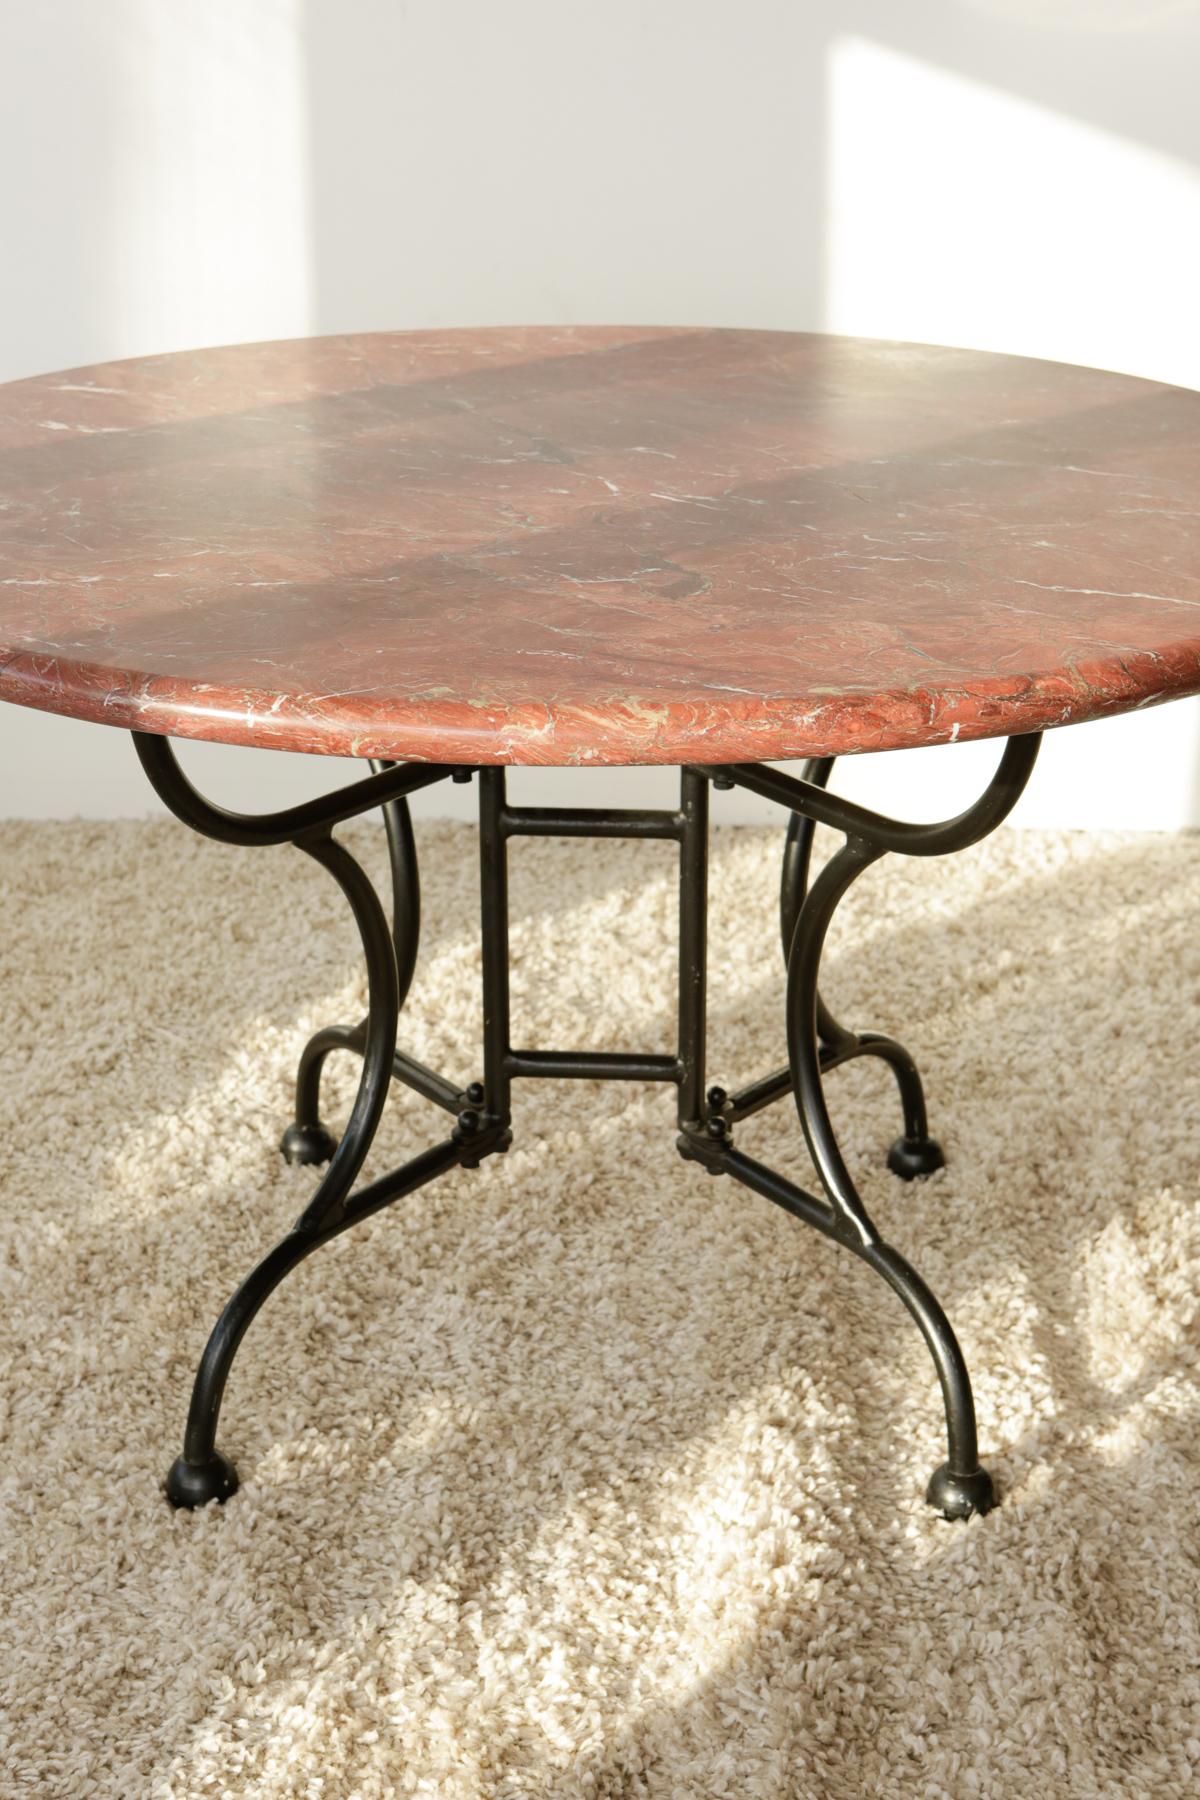 Round burgundy marble table with cast iron legs. One-of-a-kind round table made from a solid burgundy 1.25” thick marble top. The most forgiving color of marble which doesn't get stained or scratched easily. This table brings charming old world